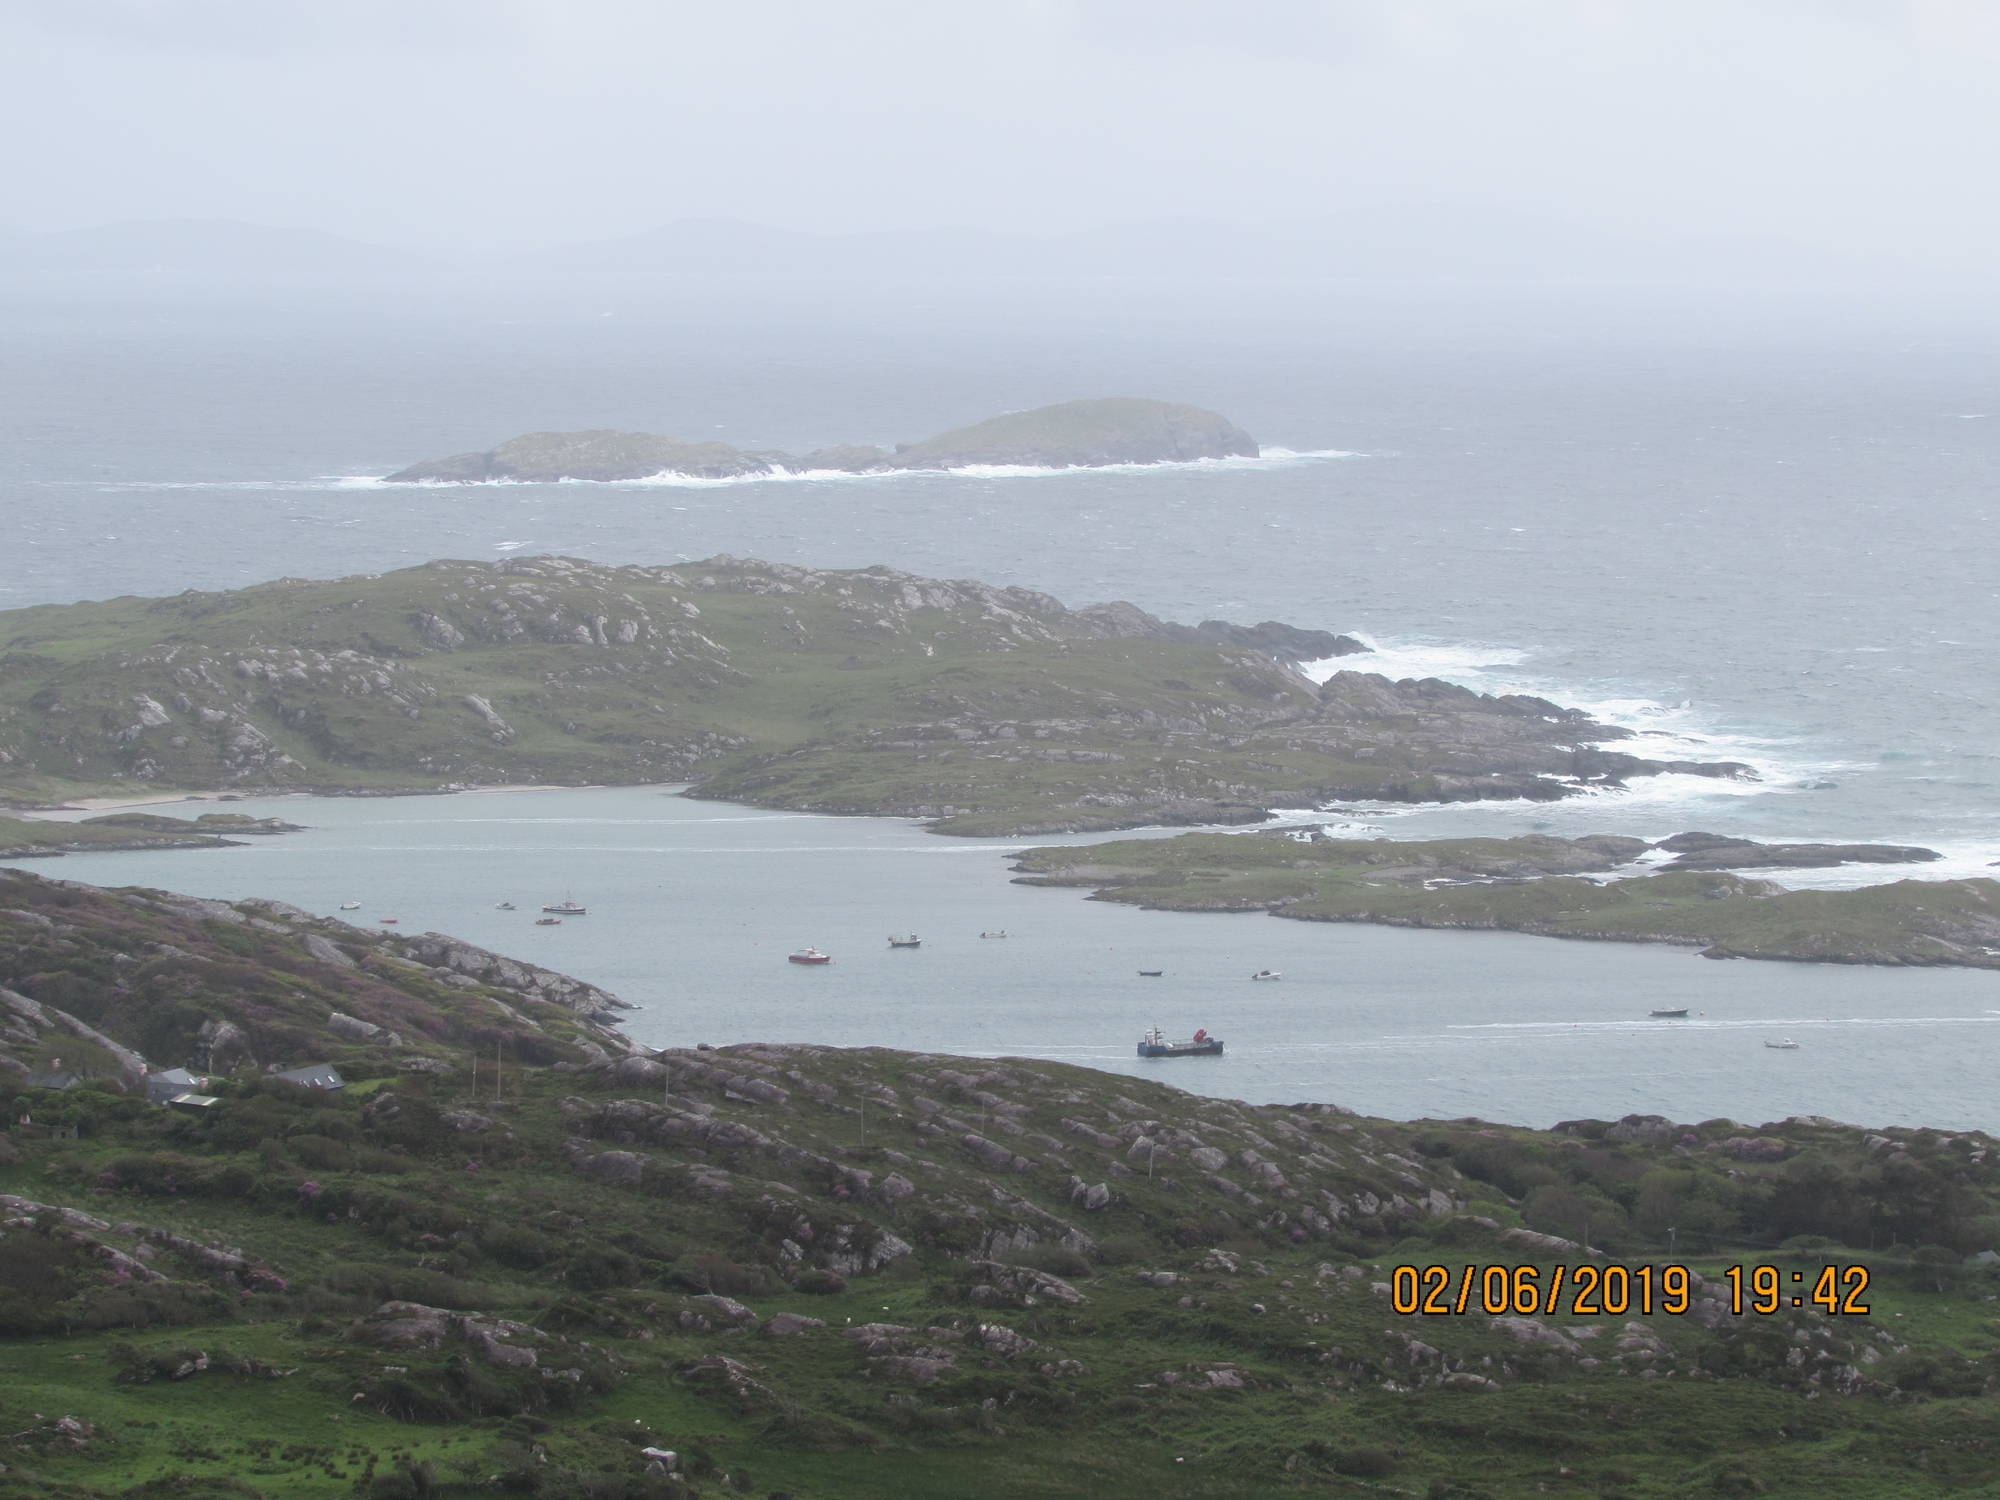 One Day trip from Cork to Ring of Kerry, Ireland